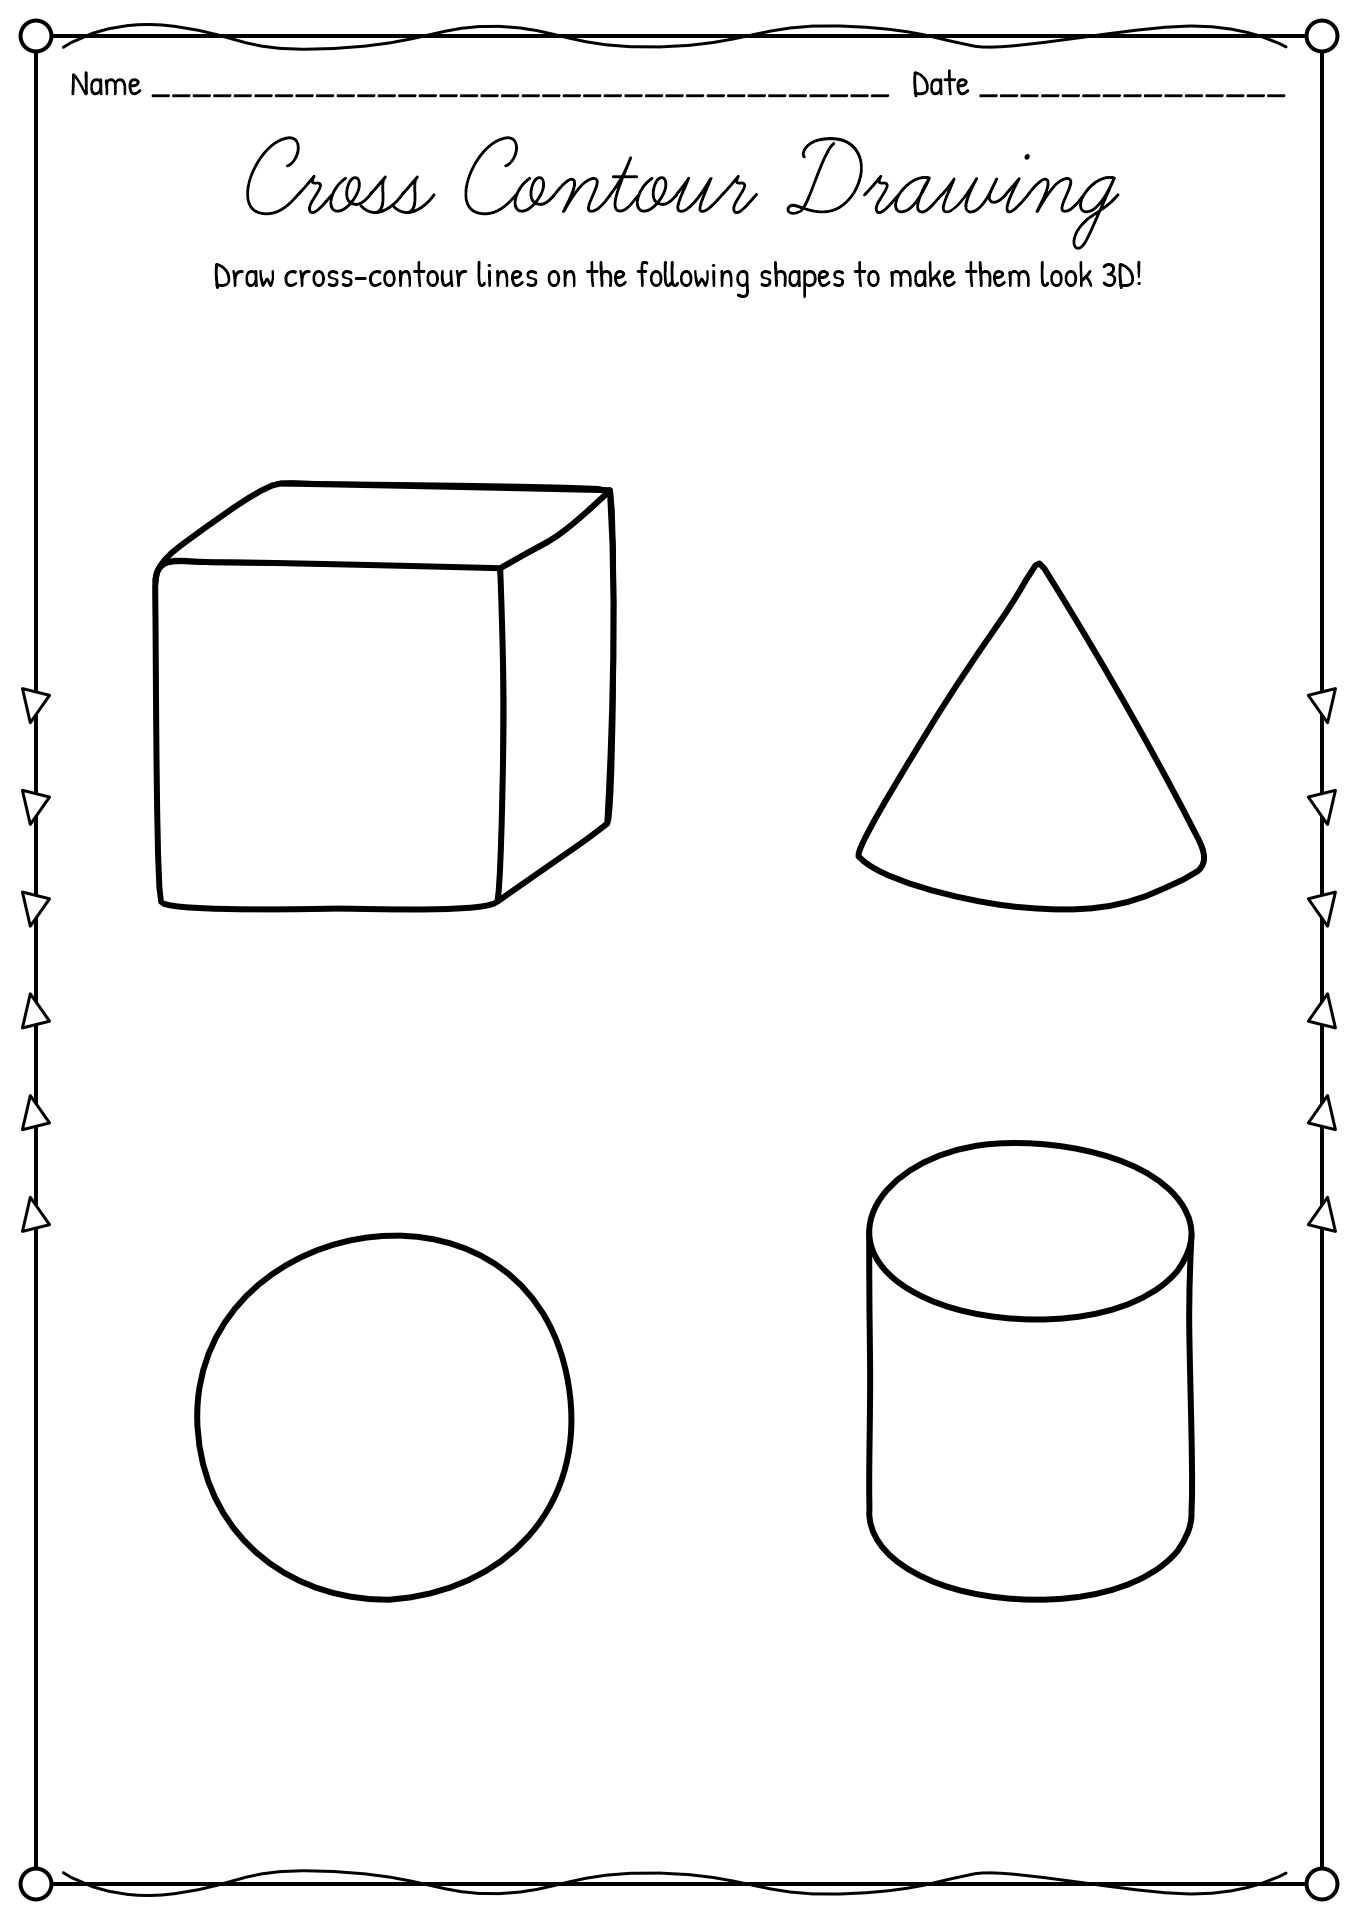 Cross Contour Line Drawing Worksheets